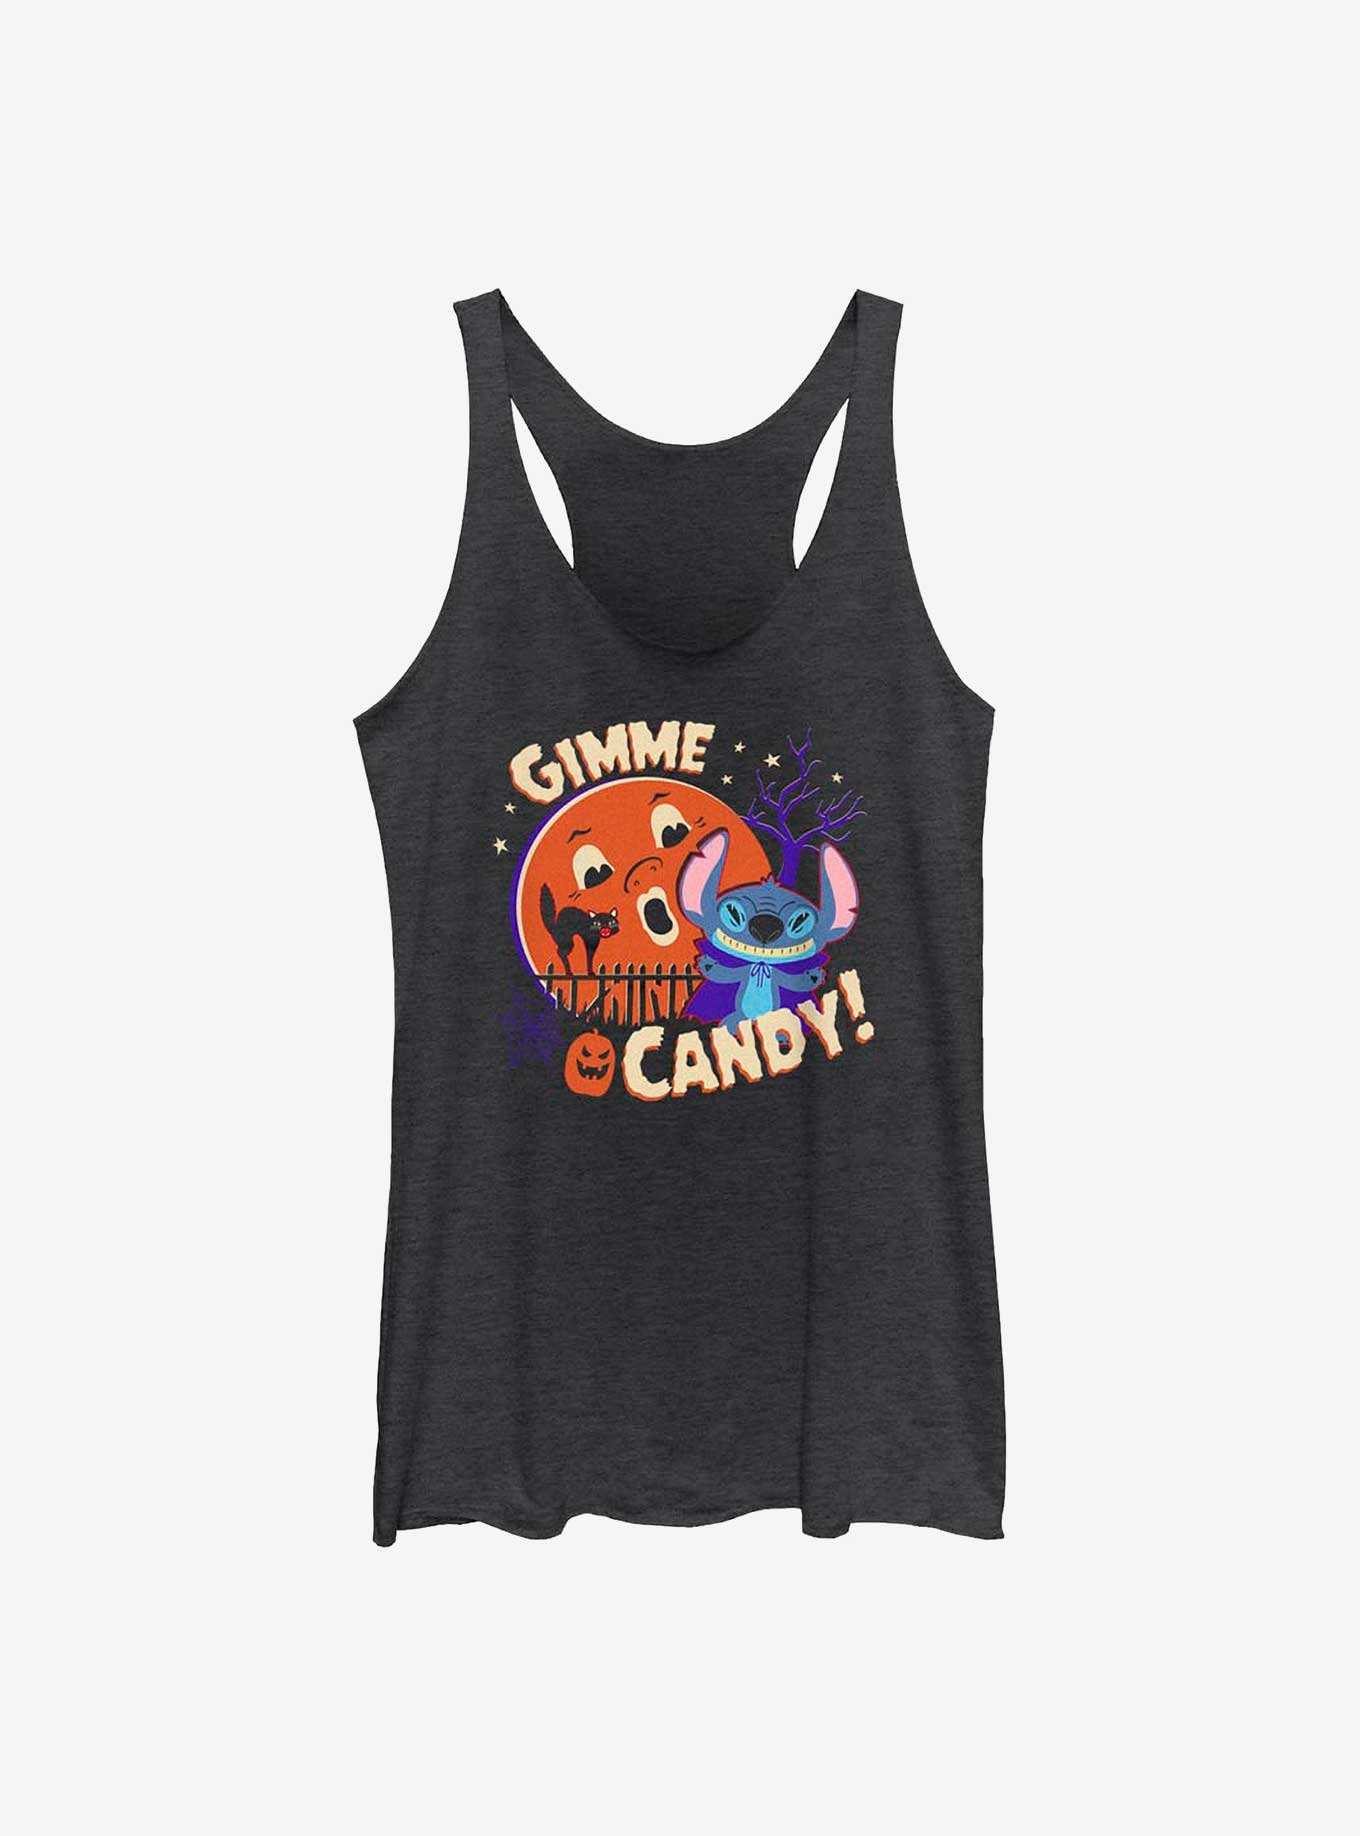 Disney Stitch Gimme Candy Spooky Halloween Tote Bag